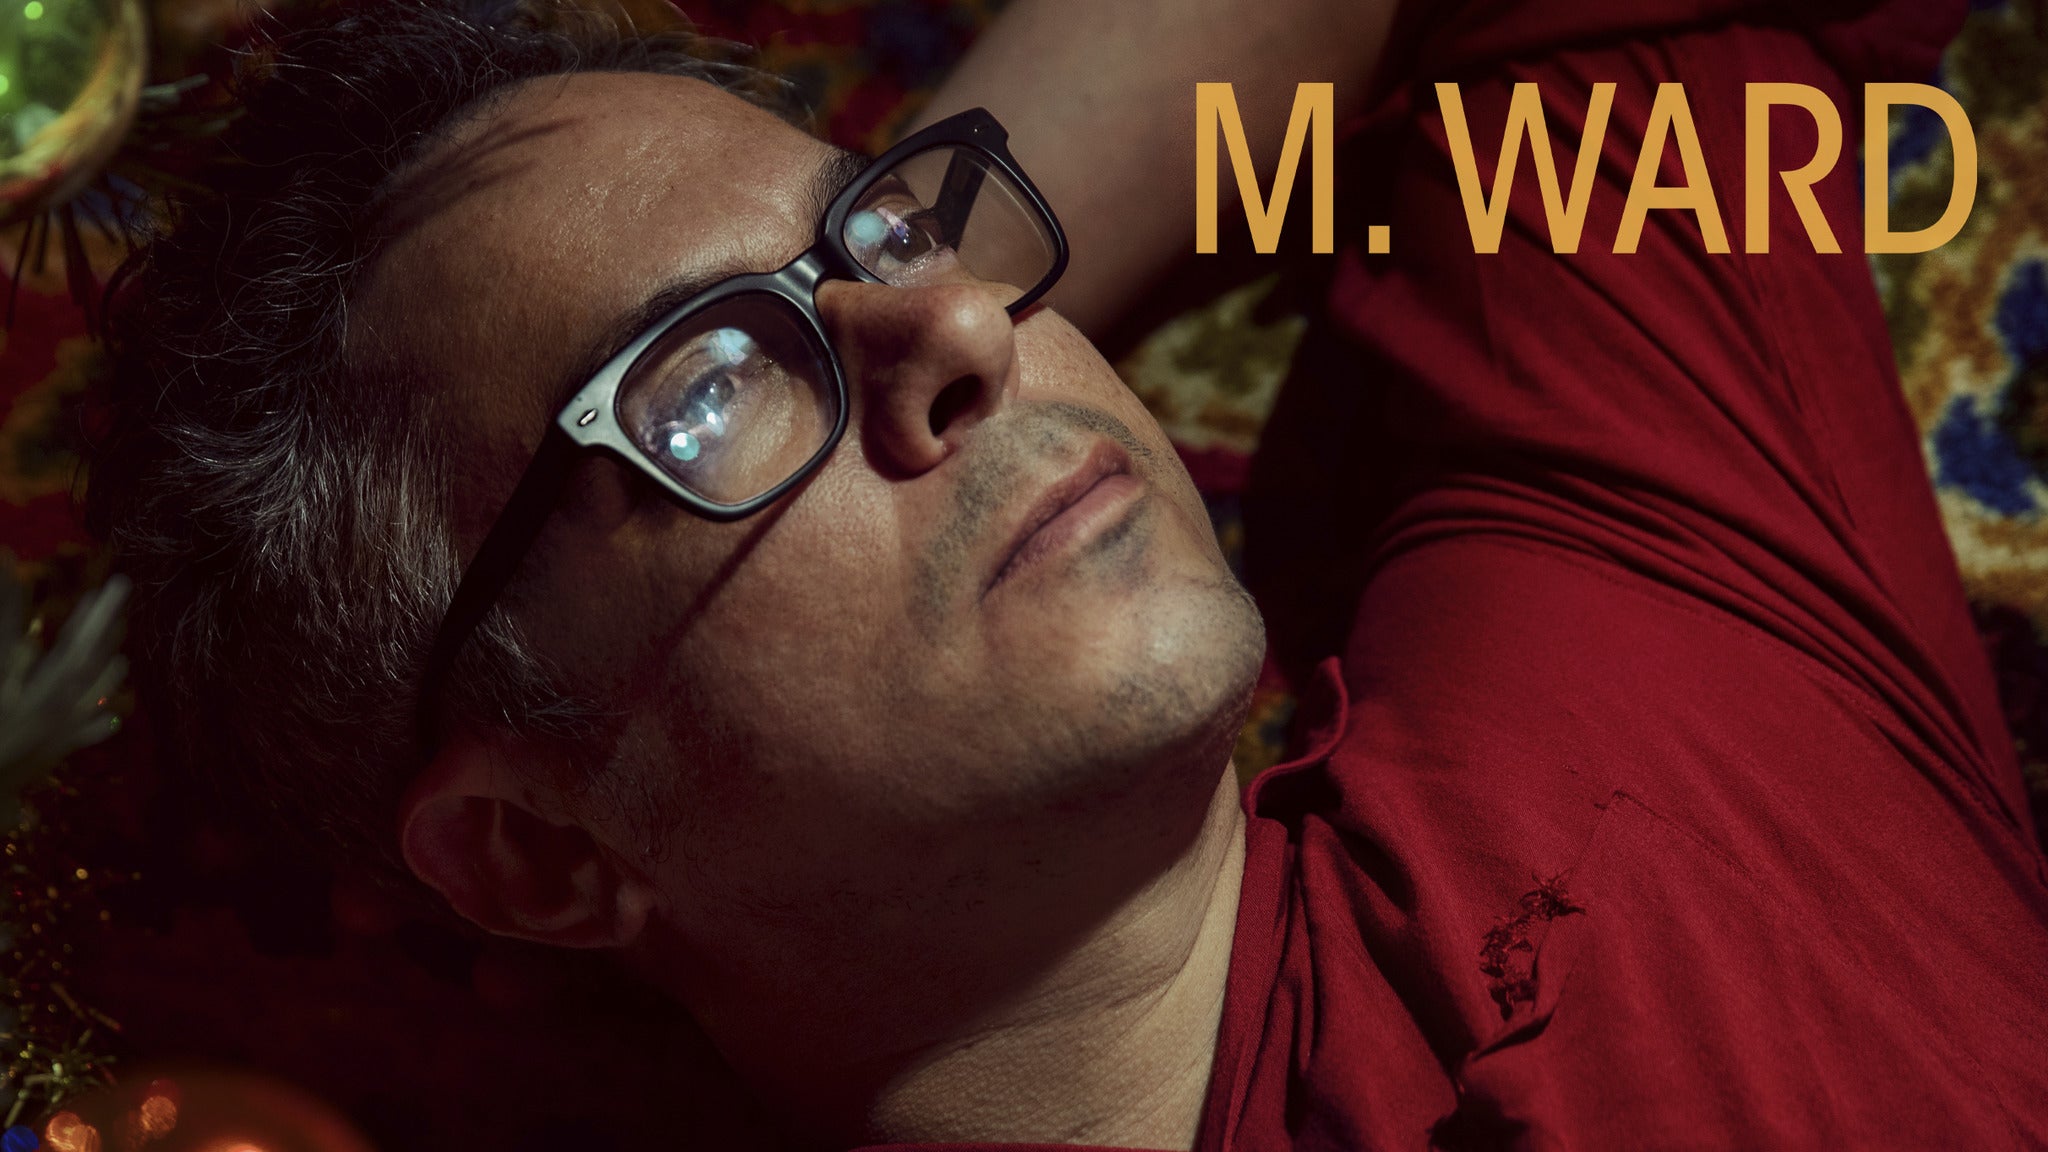 SLO Brew Live + (((folkYEAH!))) present: An Evening with M. WARD